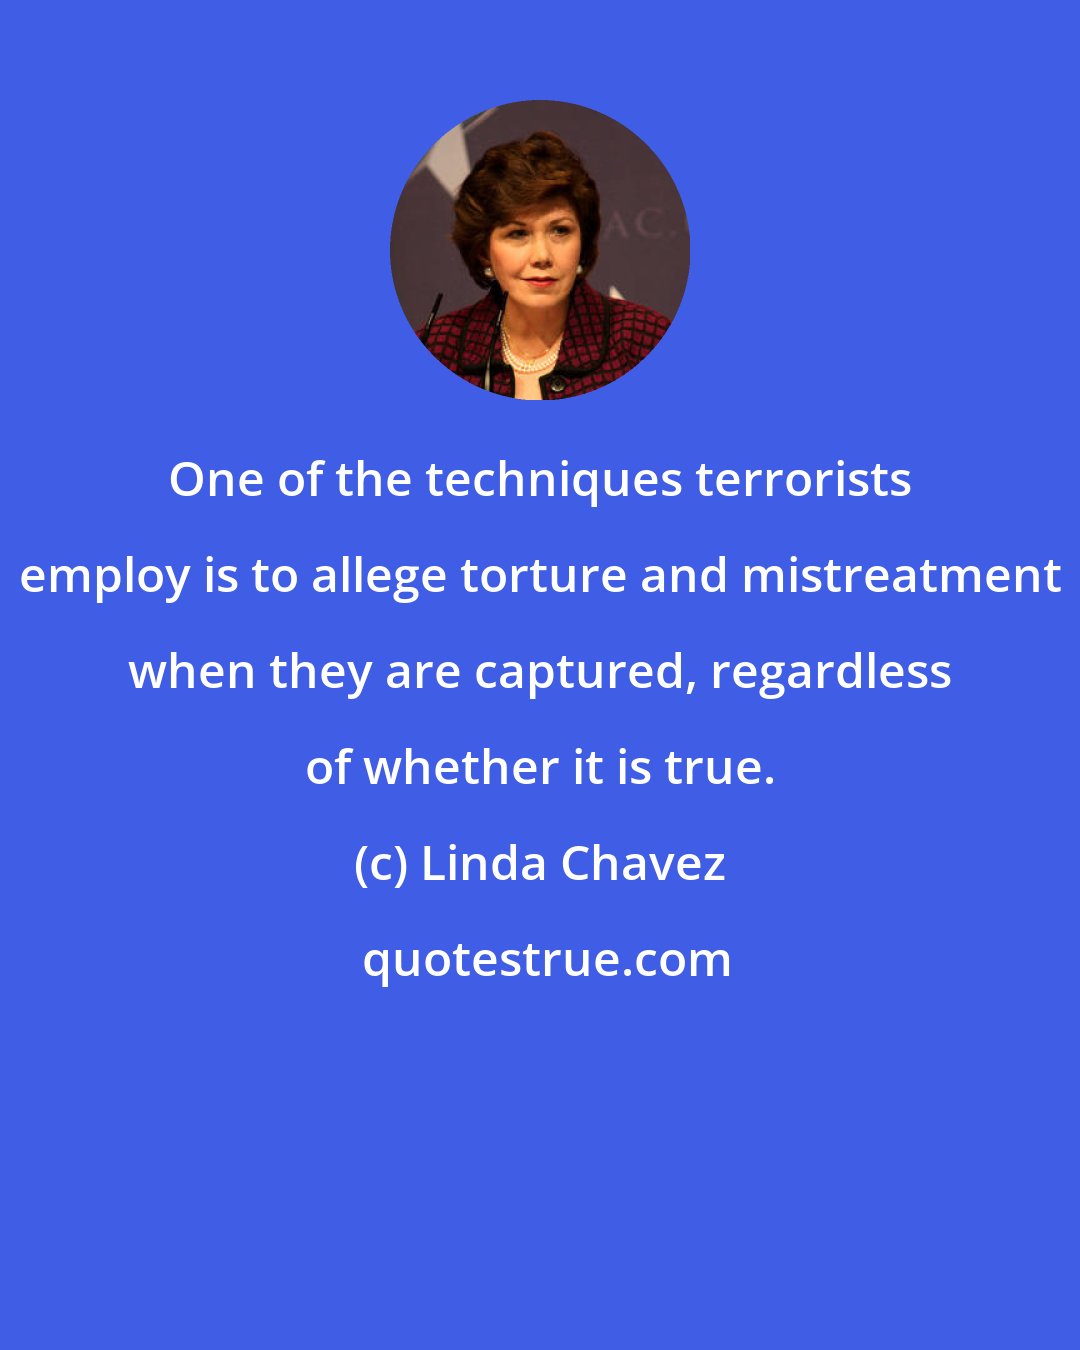 Linda Chavez: One of the techniques terrorists employ is to allege torture and mistreatment when they are captured, regardless of whether it is true.